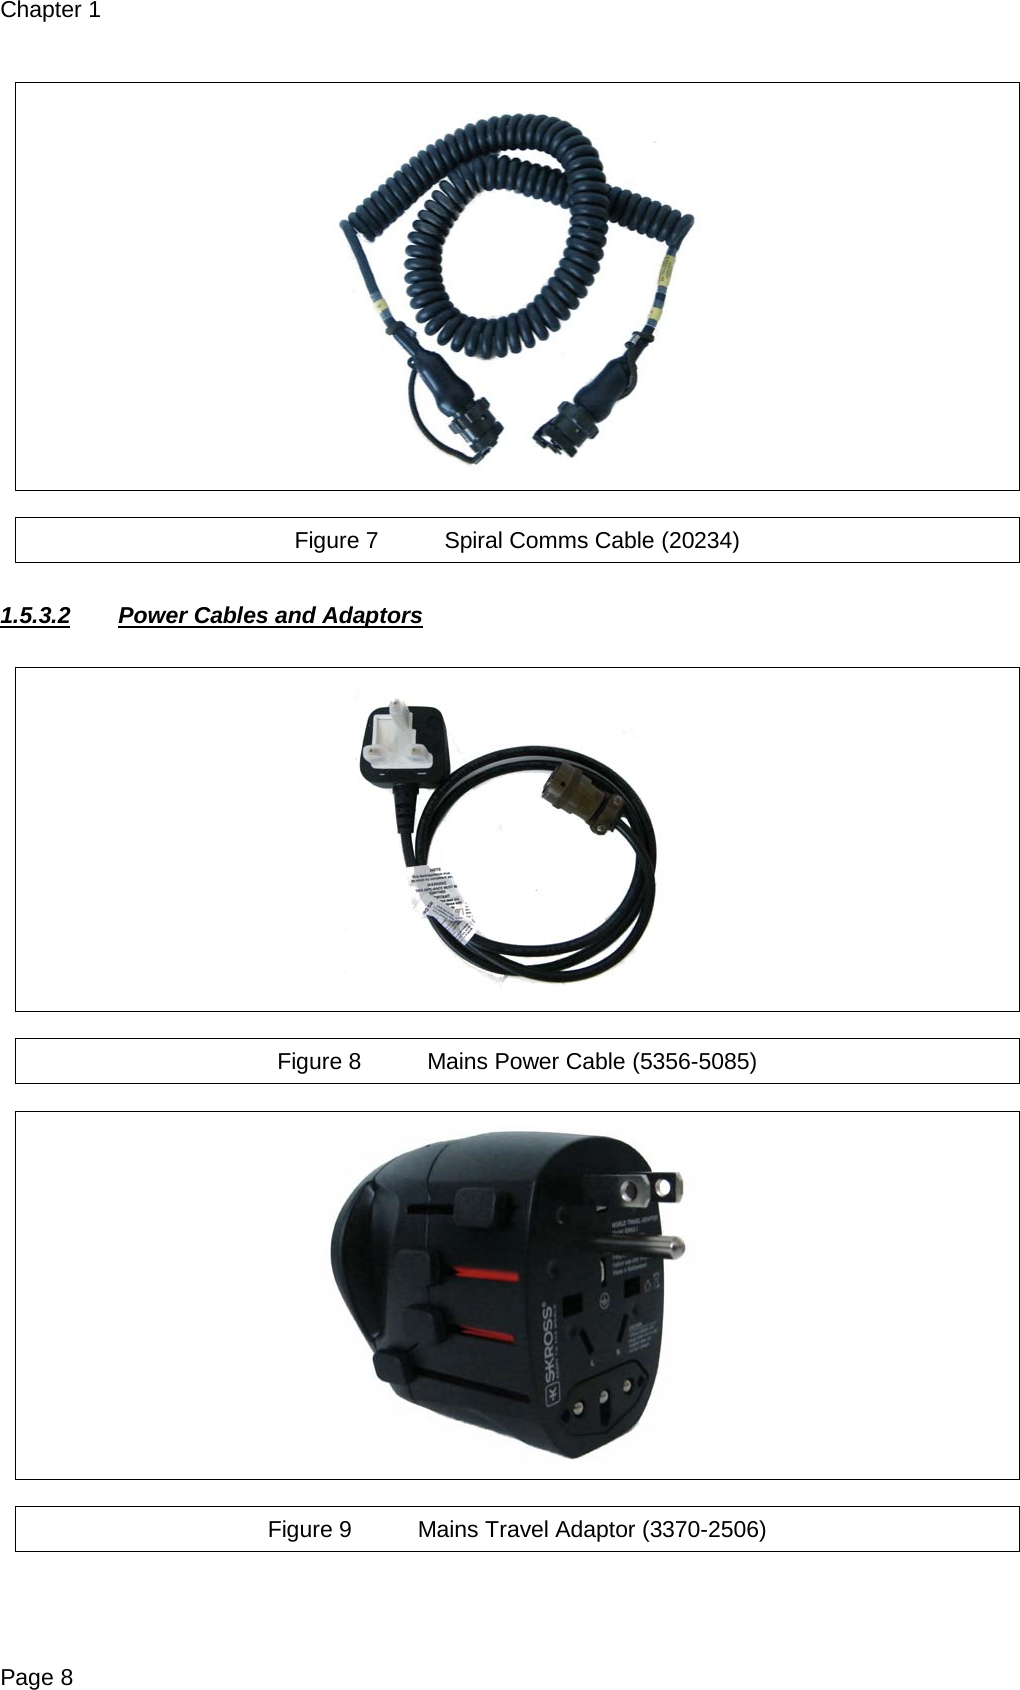 Chapter 1 Page 8    Figure 7 Spiral Comms Cable (20234)  1.5.3.2 Power Cables and Adaptors    Figure 8 Mains Power Cable (5356-5085)    Figure 9 Mains Travel Adaptor (3370-2506)  